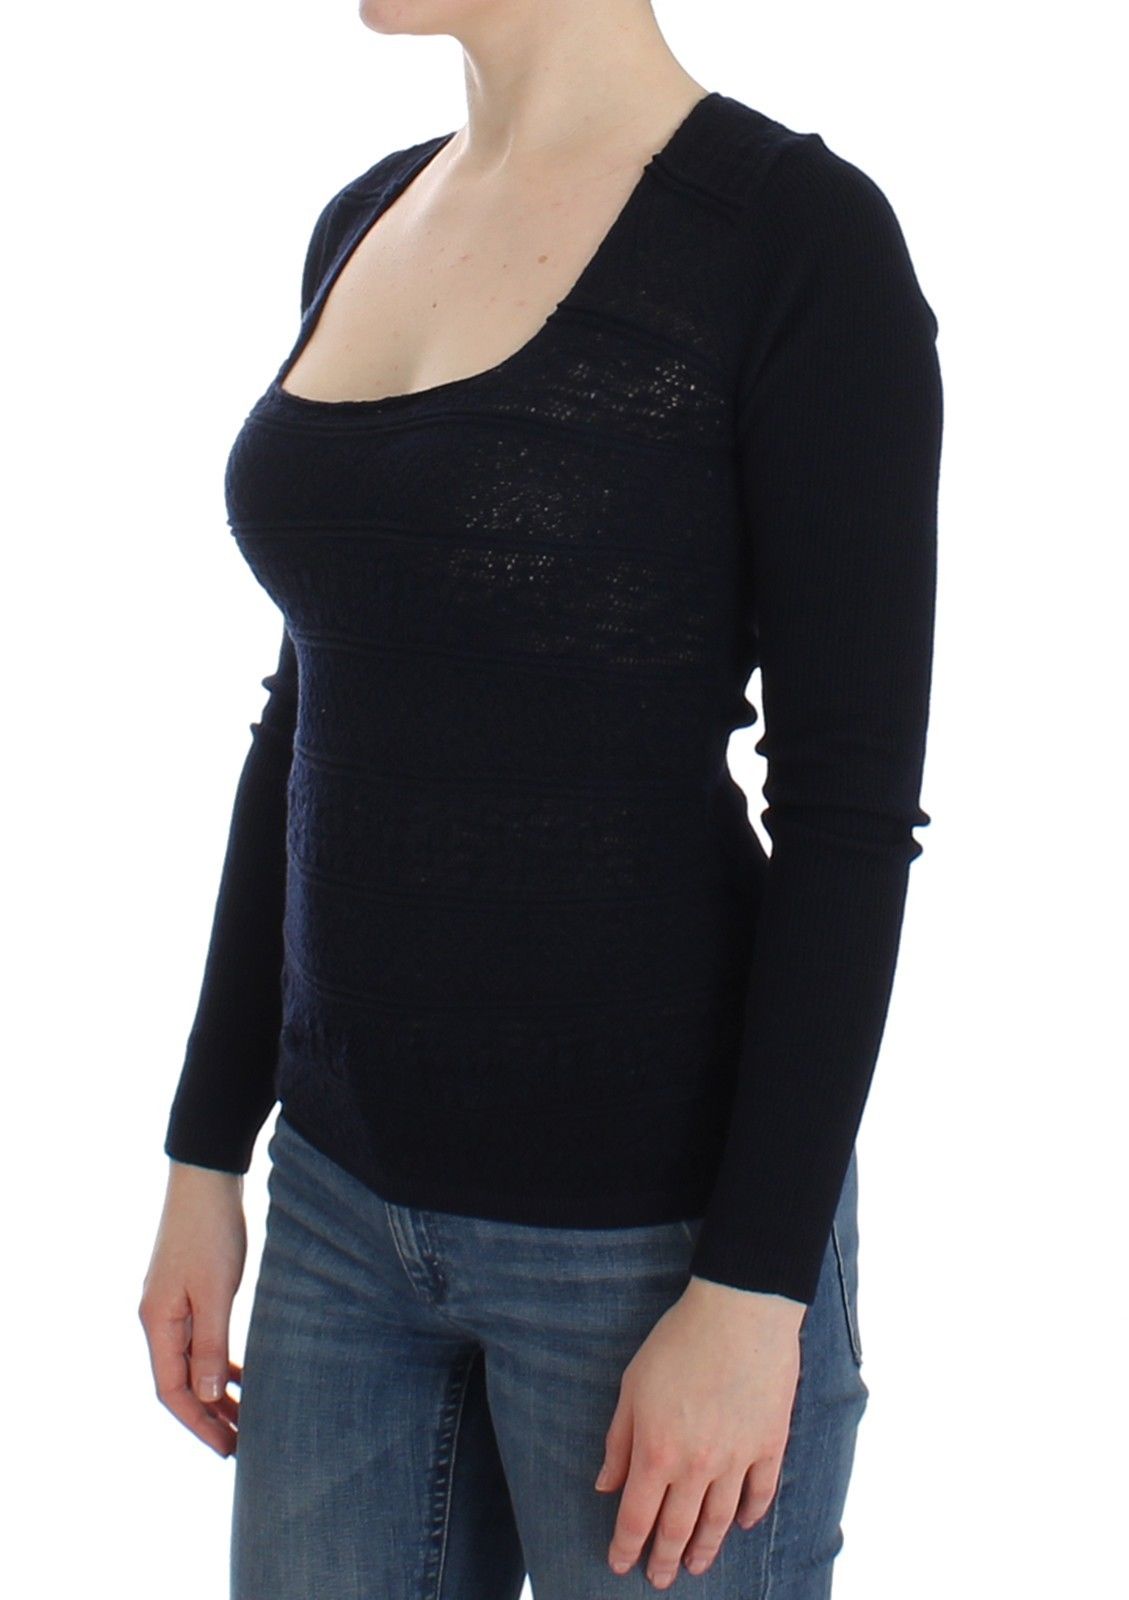 Ermanno Scervino Blue Knitted Wool Stretch Sweater Top